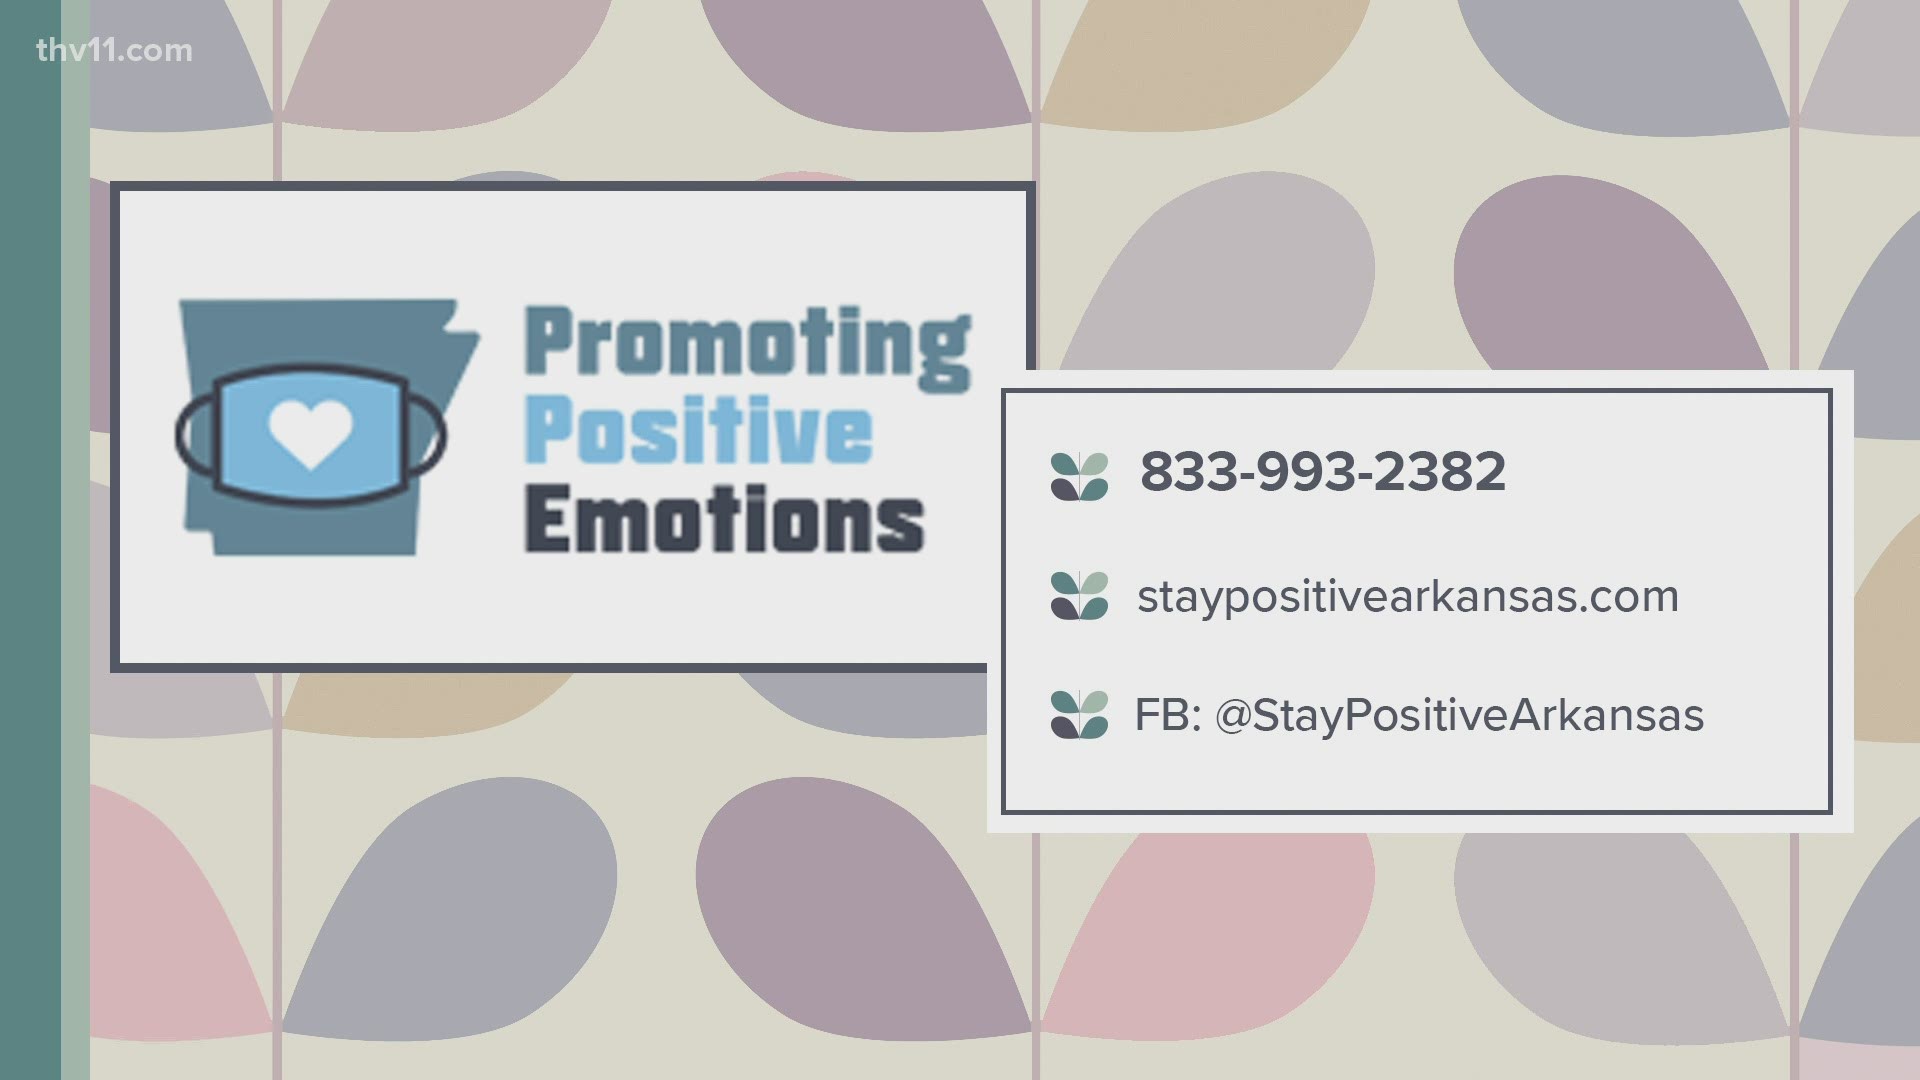 The Stay Positive Arkansas Promoting Positive Emotions Program (PPE) is a free confidential crisis counseling program for anyone in Arkansas.